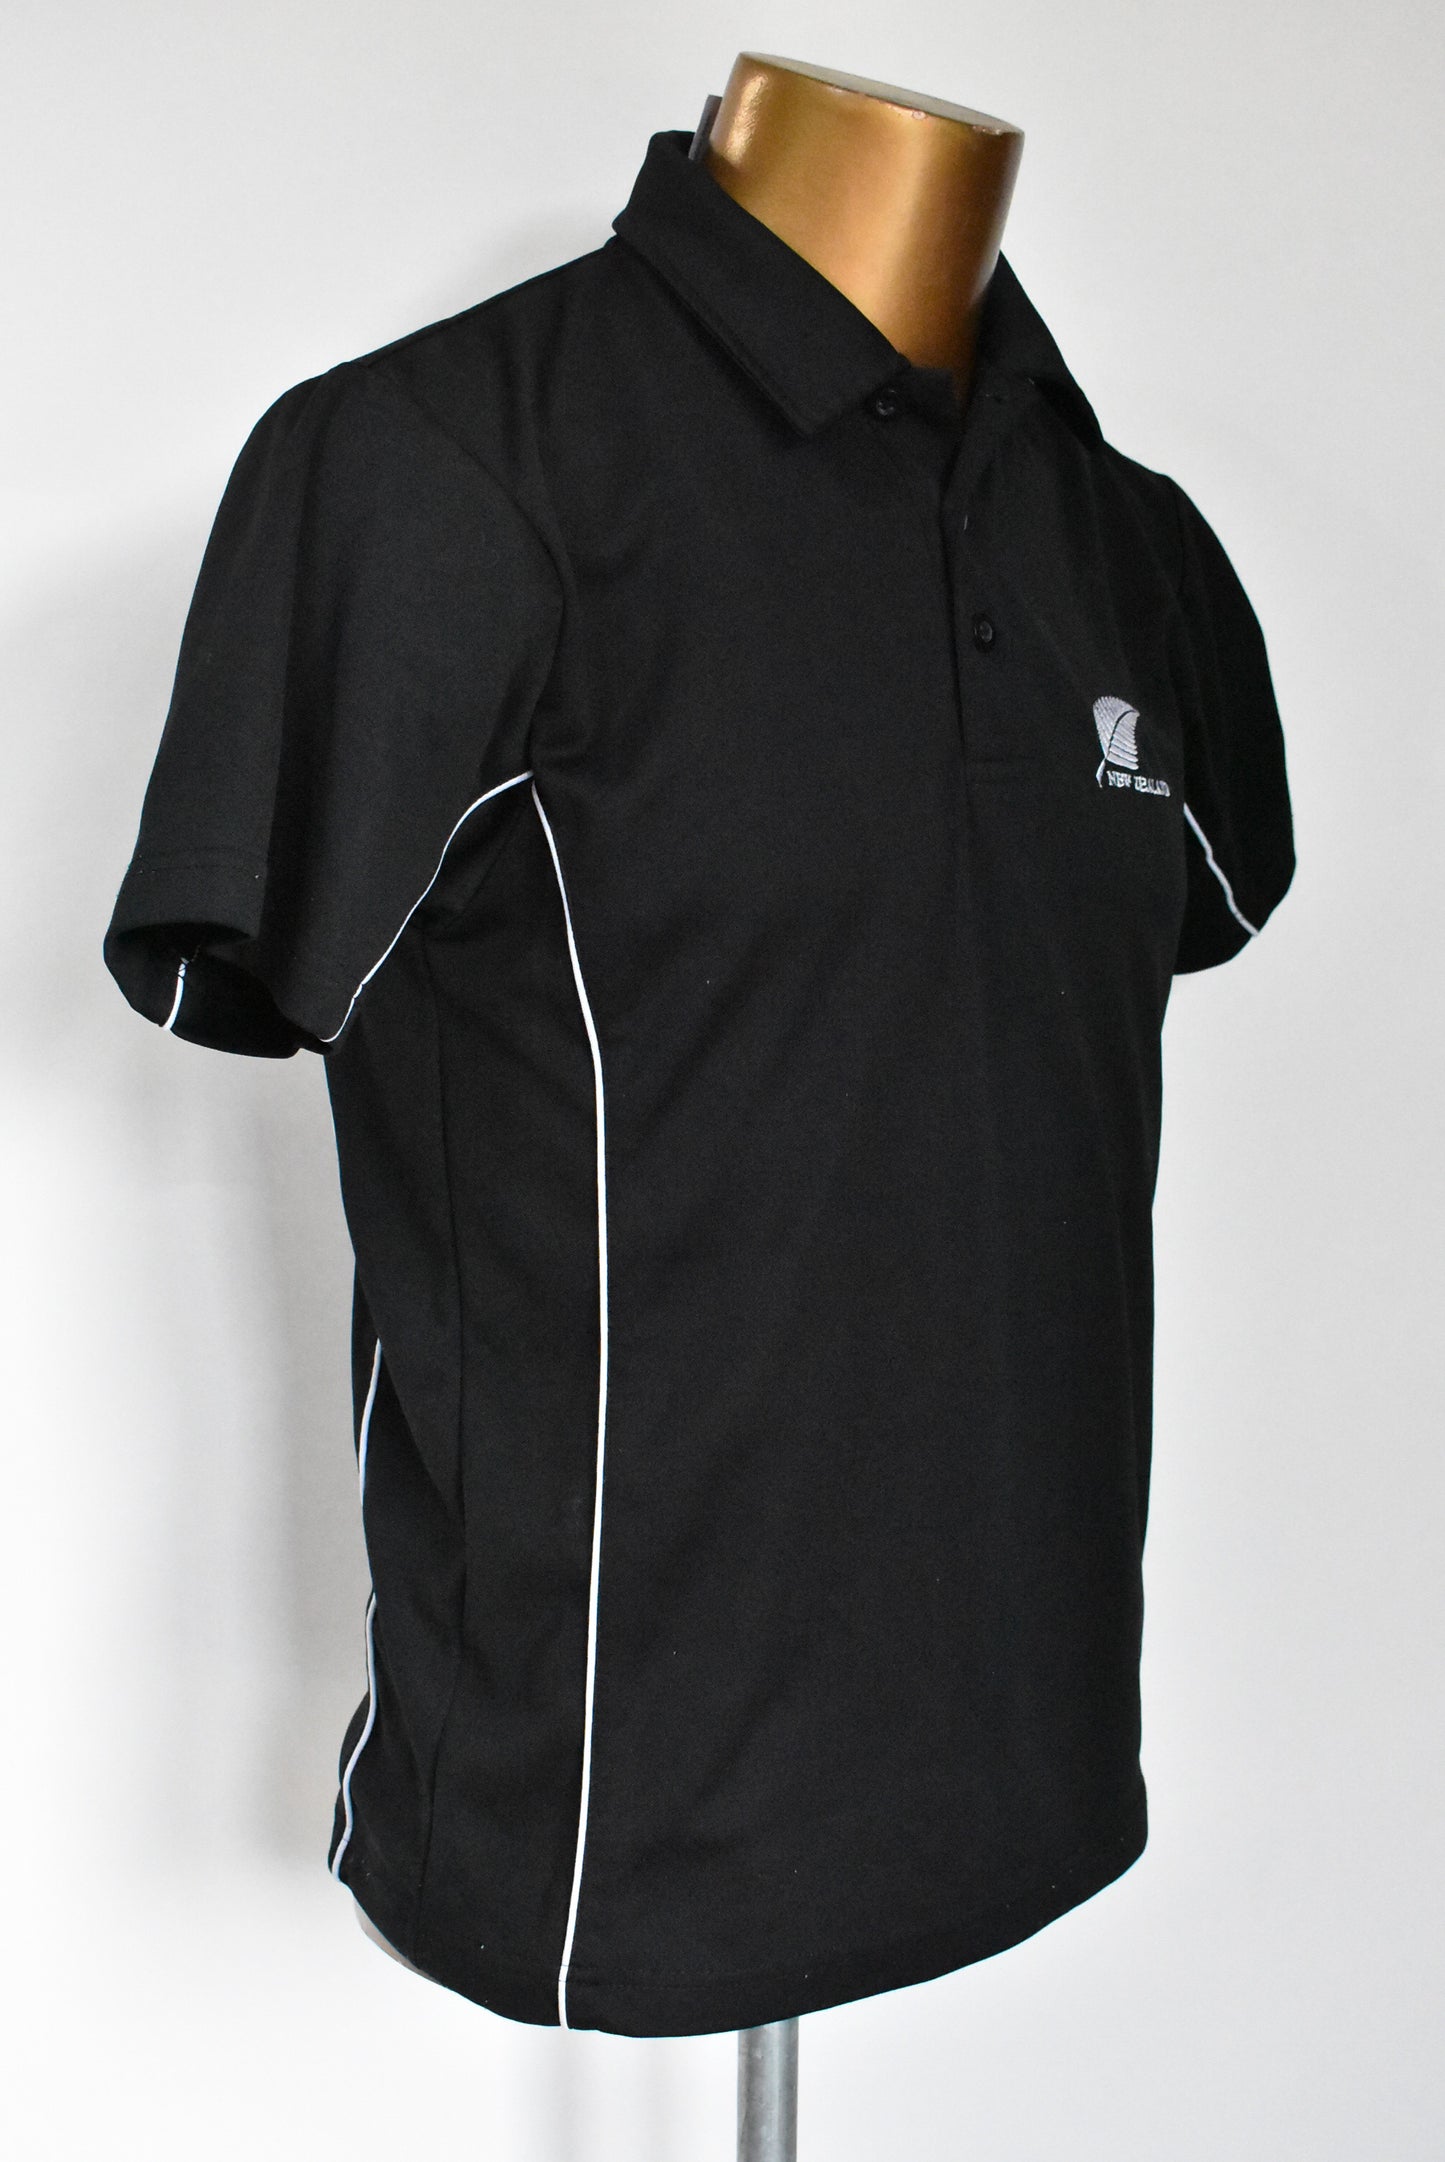 Outward Bound Sport officially licensed NZ merch polo, S